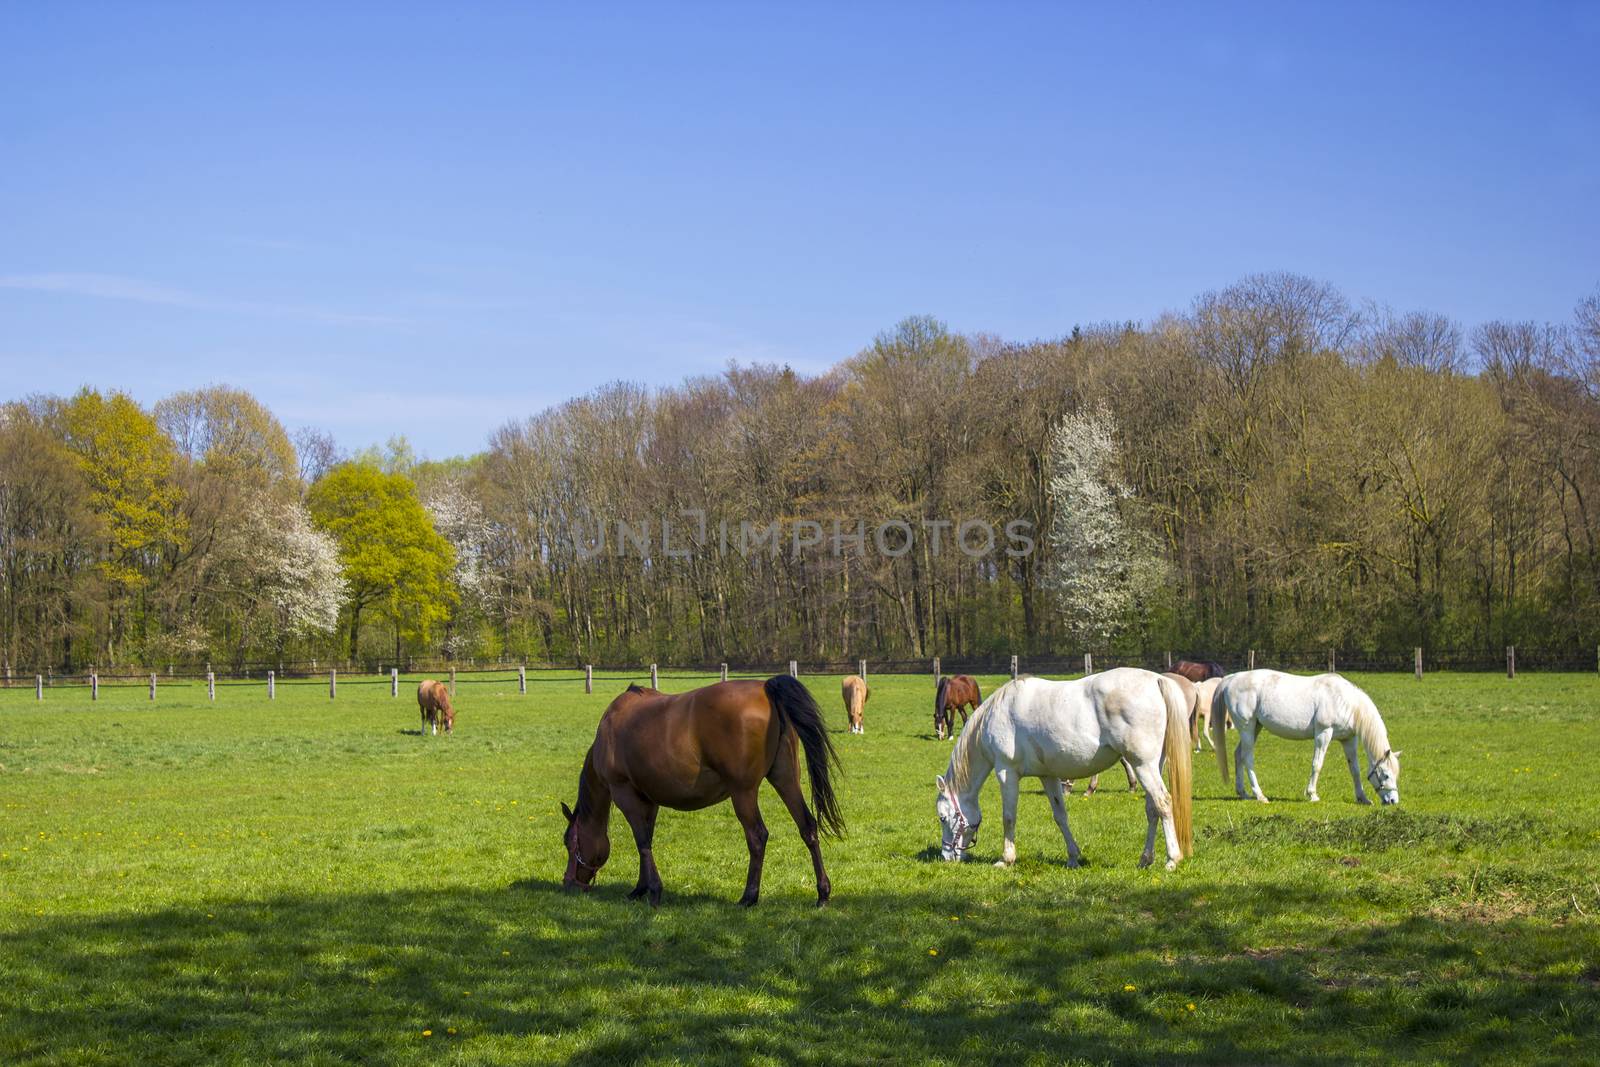 Horses on a spring pasture by miradrozdowski